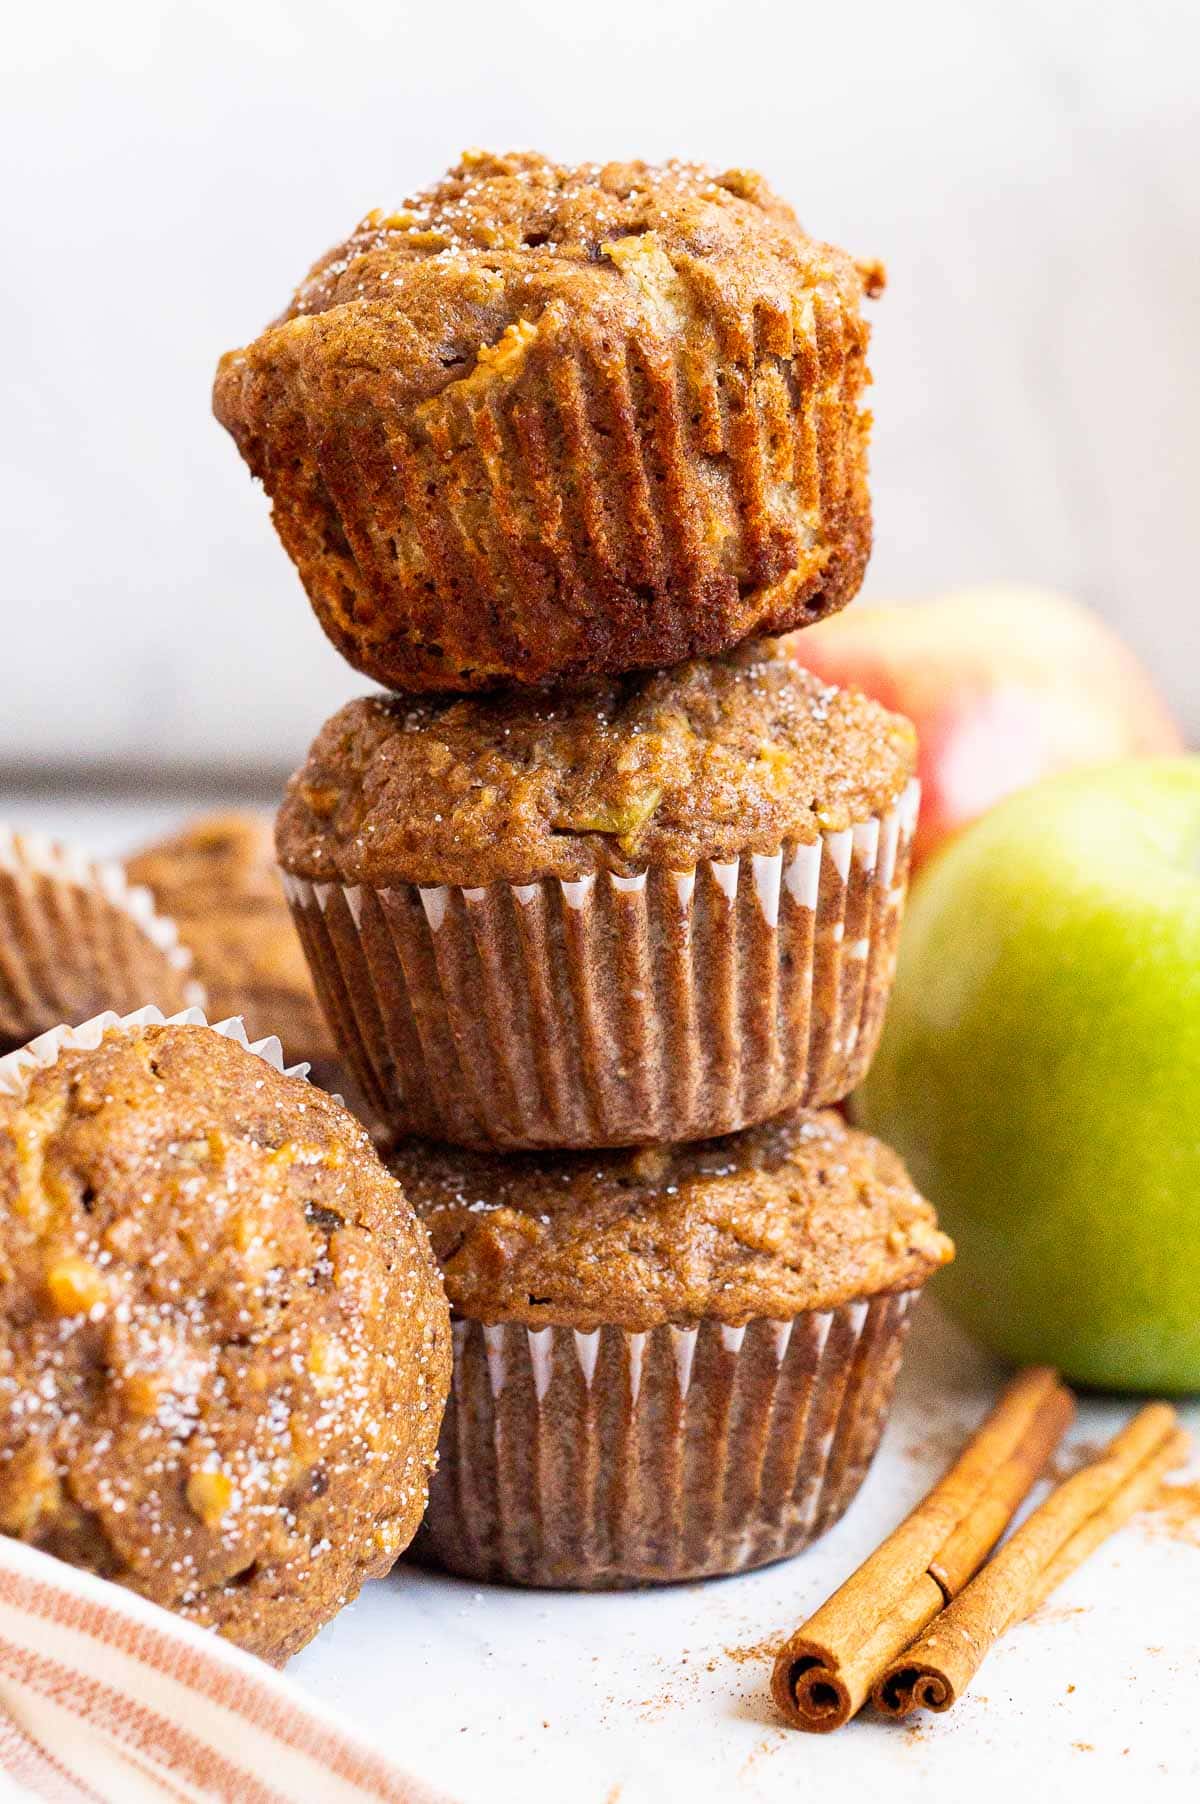 Three healthy apple muffins stacked on top of each other. Apples, cinnamon sticks and napkin on a counter.